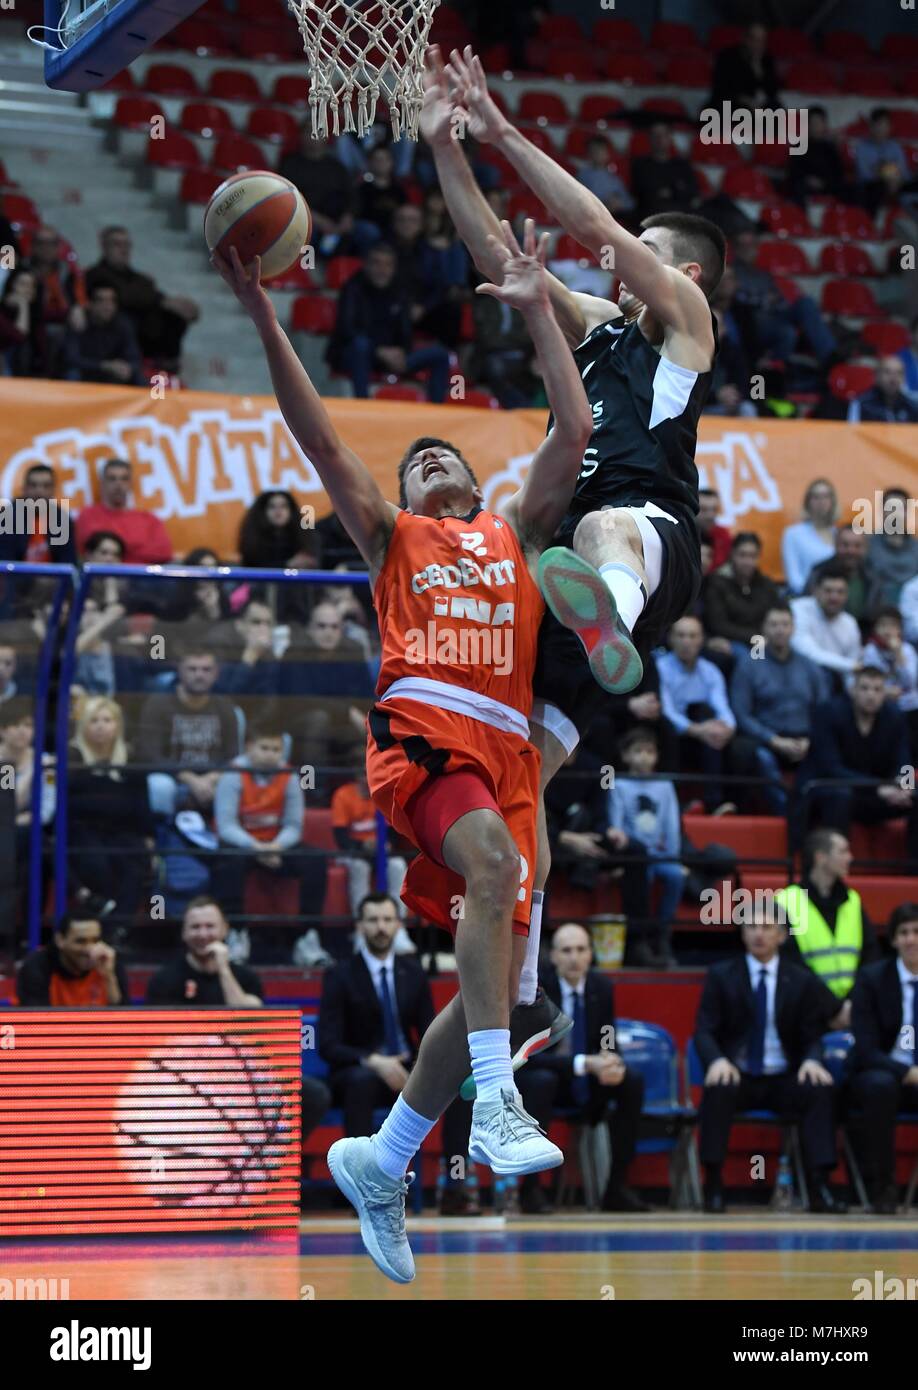 Zagreb, Croatia. 10th Mar, 2018. Filip Kruslin (L) of Cedevita goes to the basket during Round 22 ABA League basketball match between Cedevita and Partizan in Zagreb, Croatia, on March 10, 2018. Cedevita won 84-75. Credit: Marko Lukunic/Xinhua/Alamy Live News Stock Photo